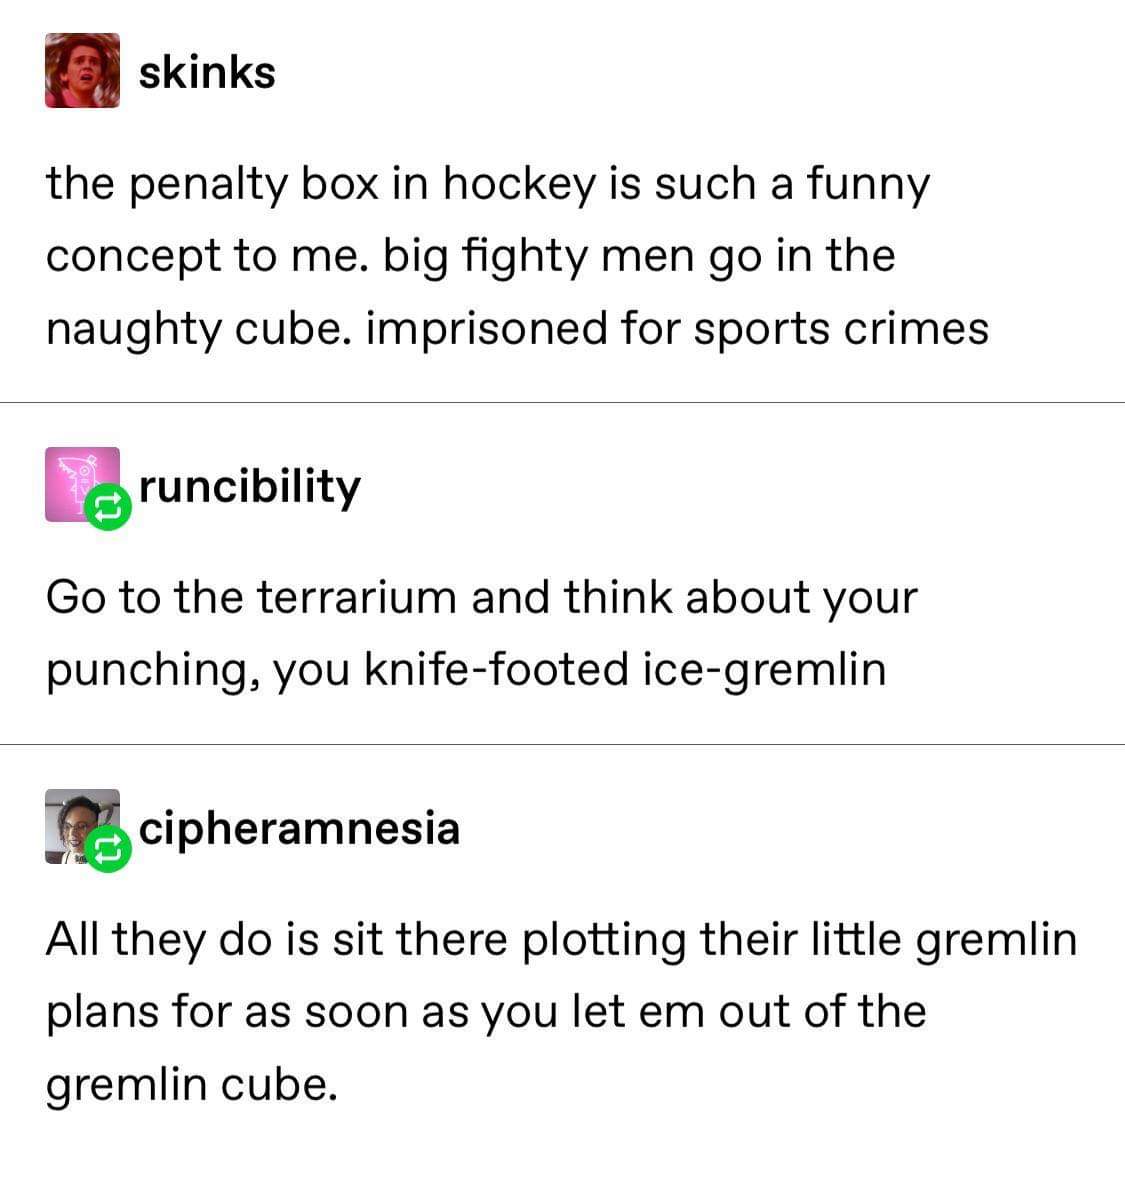 Long Skirt - skinks the penalty box in hockey is such a funny concept to me. big fighty men go in the naughty cube. imprisoned for sports crimes C runcibility Go to the terrarium and think about your punching, you knifefooted icegremlin cipheramnesia All 